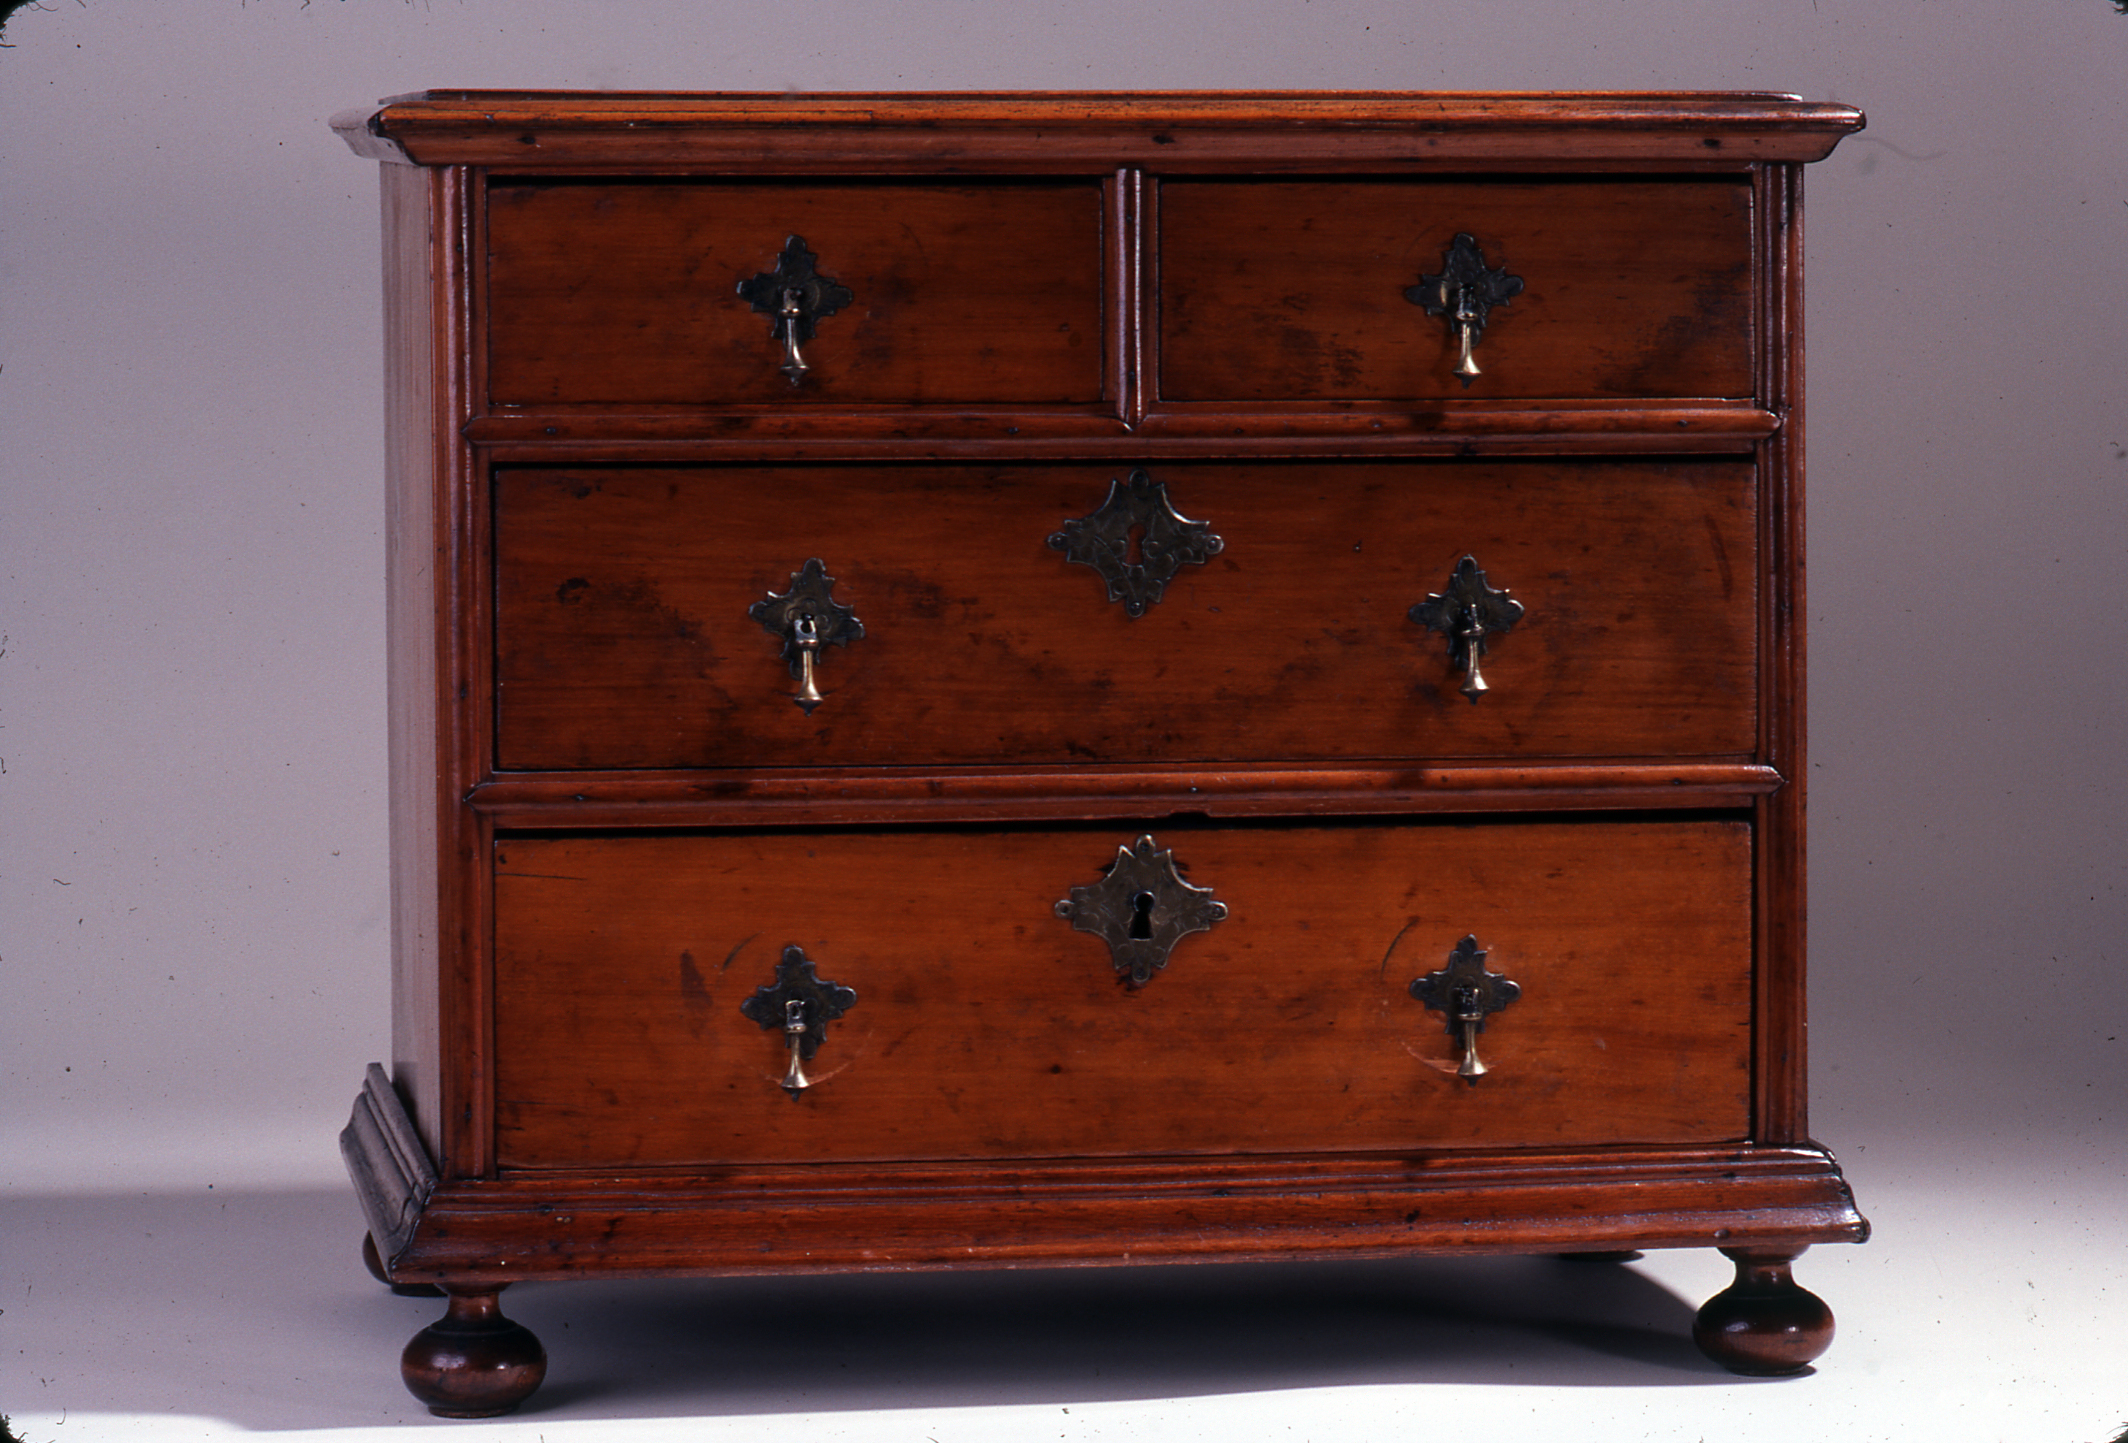 Furniture - Chest of drawers